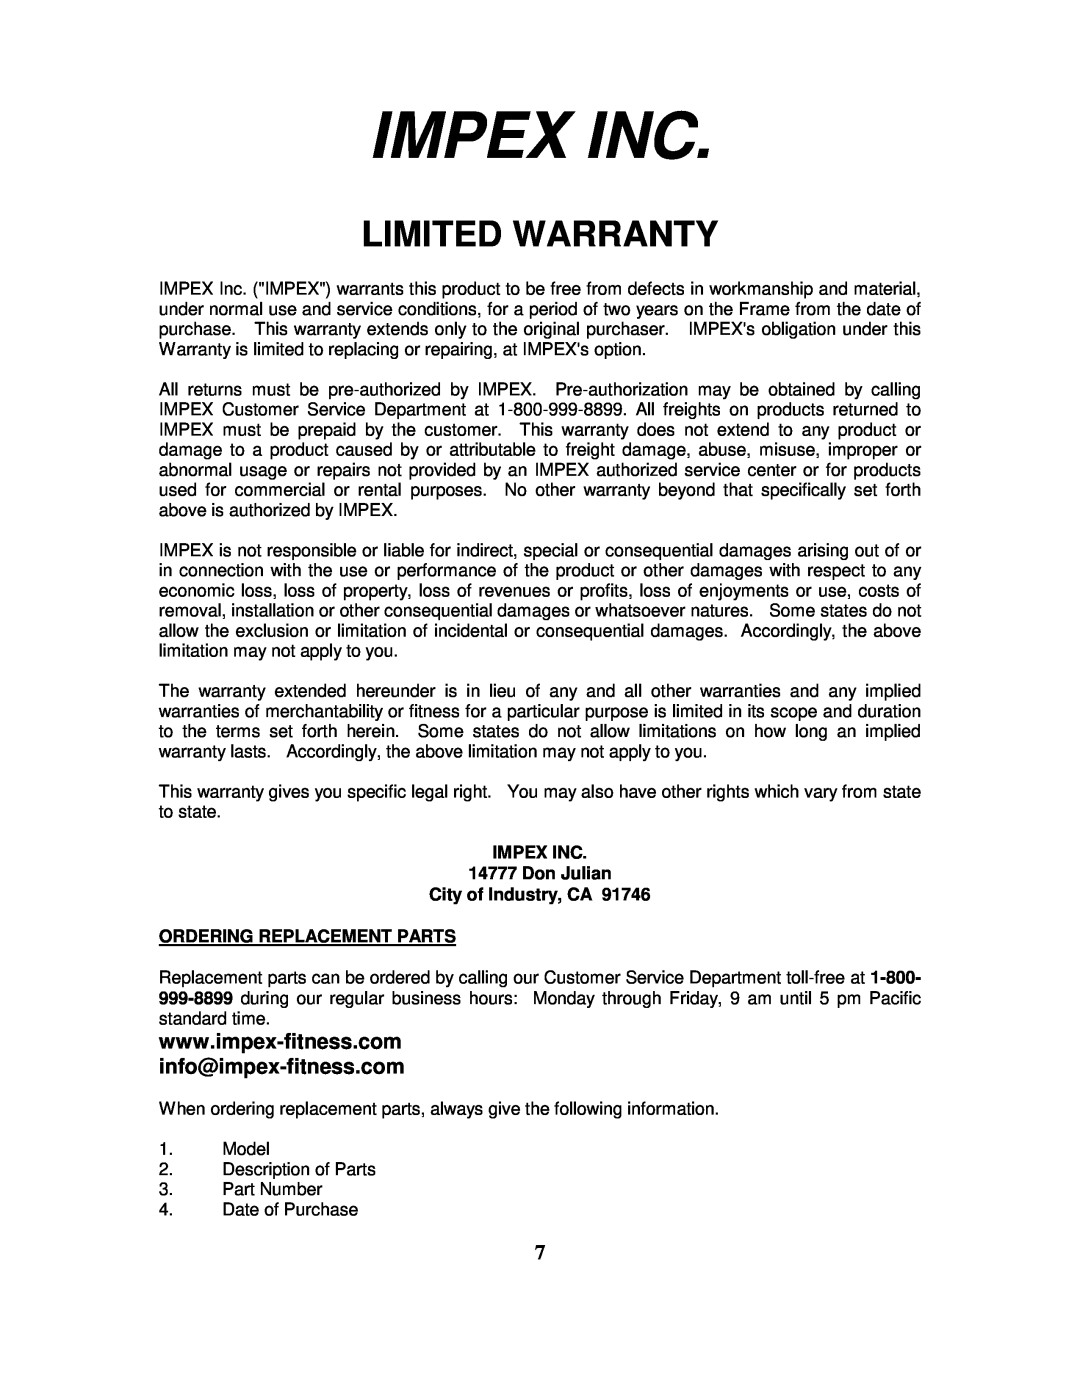 Impex TSA-660 Impex Inc, Limited Warranty, IMPEX INC 14777 Don Julian City of Industry, CA, Ordering Replacement Parts 